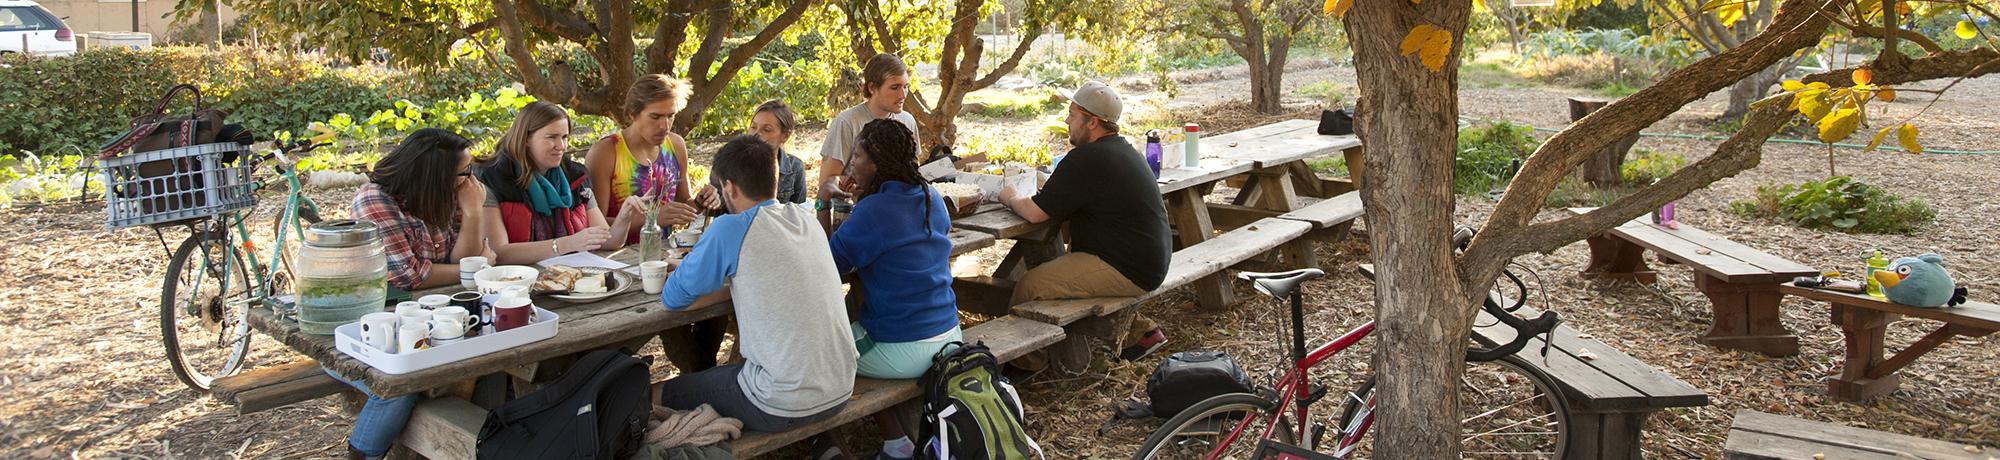 Students sitting outside at a picnic table